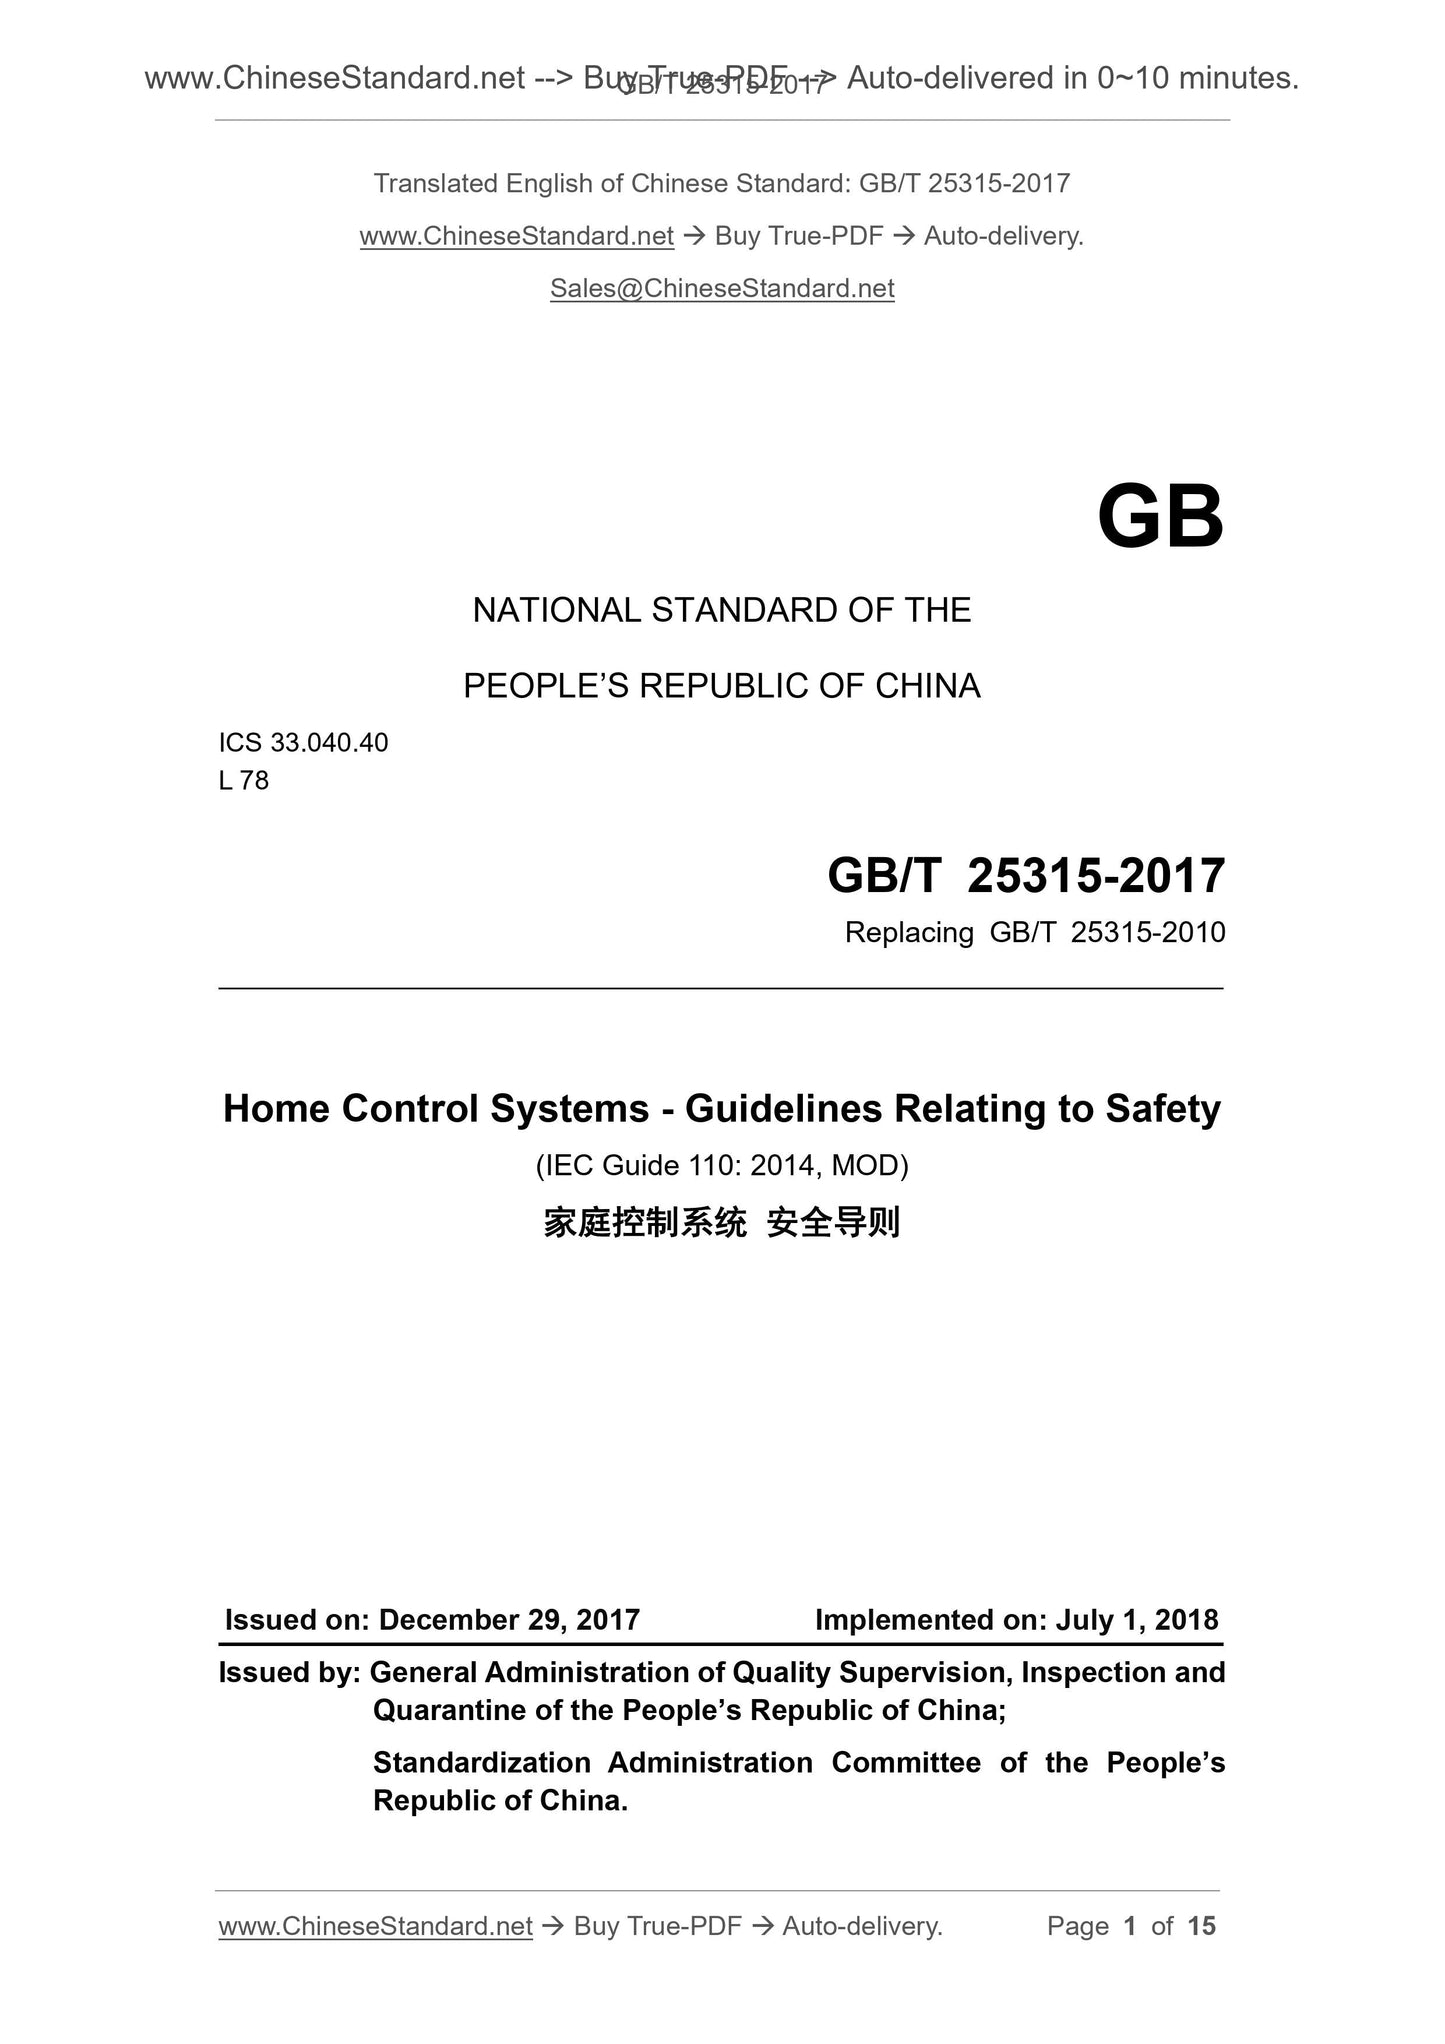 GB/T 25315-2017 Page 1